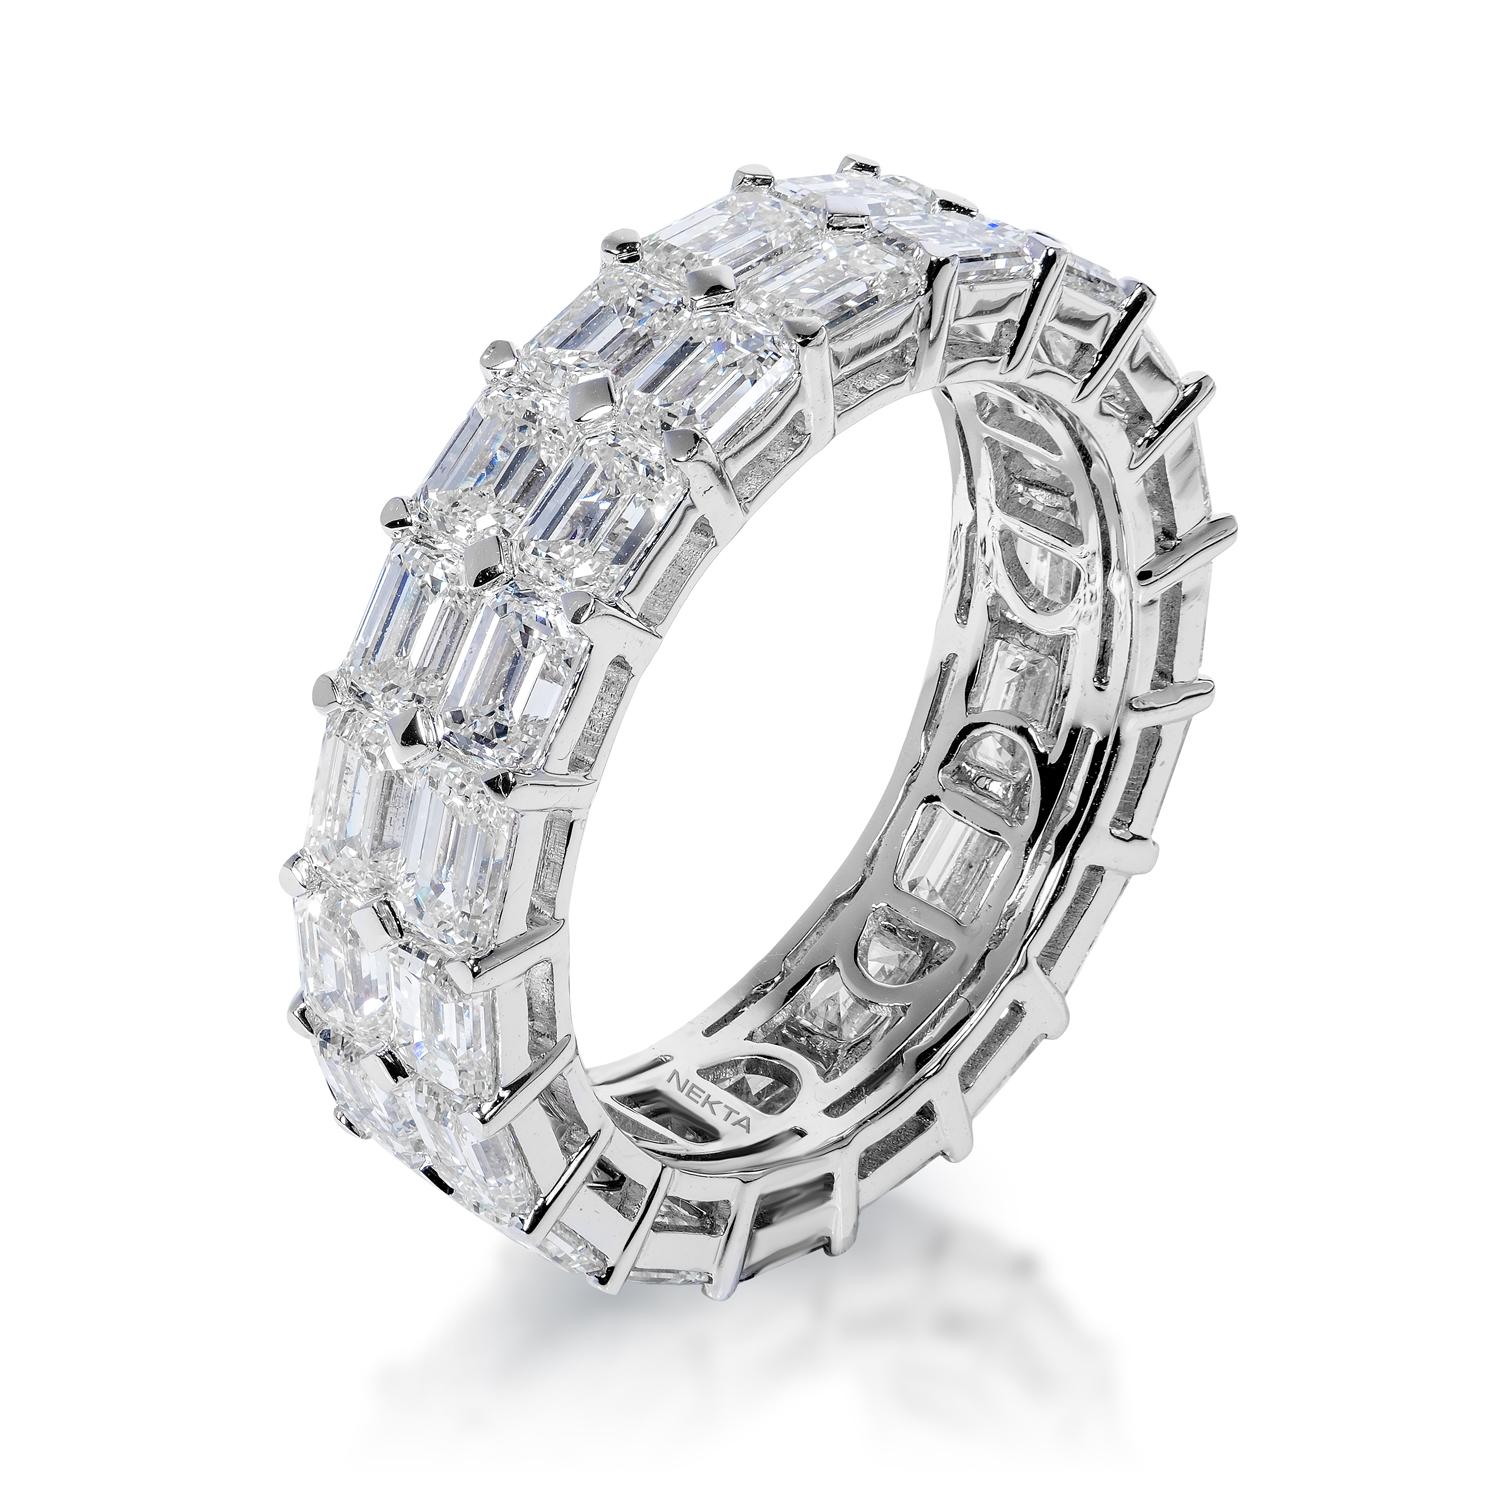 Eternity Band Diamond for Male:
Carat Weight: 7.12 Carats
Number of Diamond : 38
Style: Emerald Cut

Setting: ﻿2 Row Shared Prong
Metal: 14 Karat White Gold 5.20 grams

Total Carat Weight: 7.12 Carats